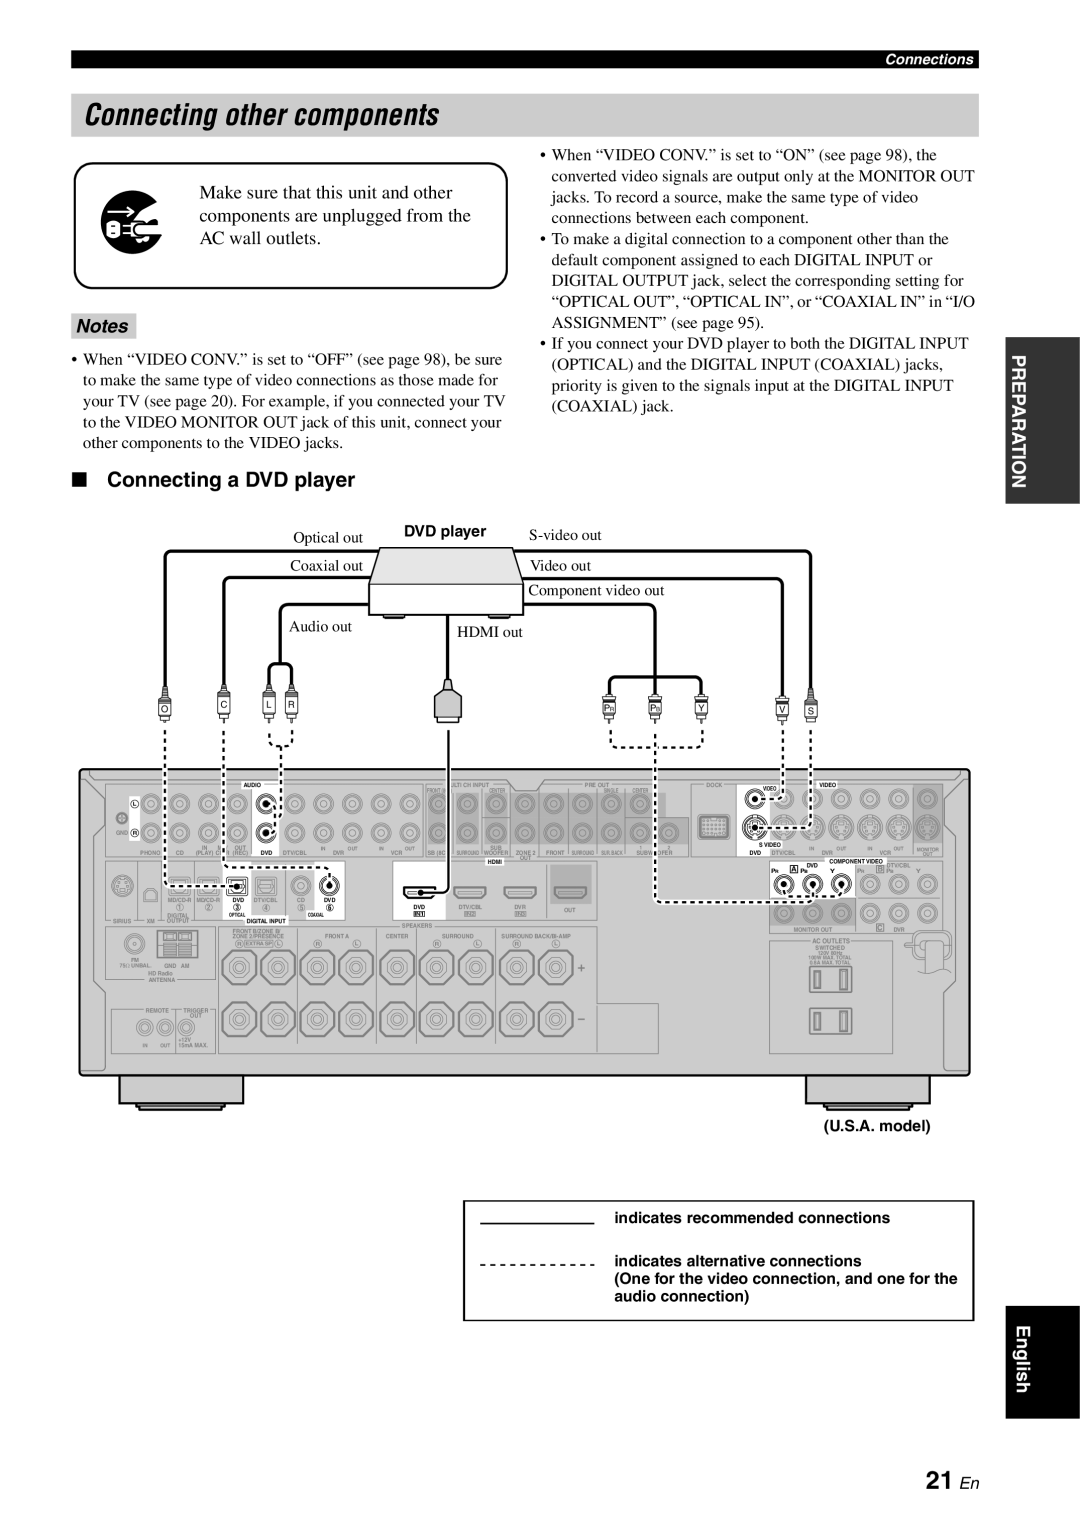 Yamaha RX-V863 owner manual Connecting other components, 21 En, Connecting a DVD player, Notes 